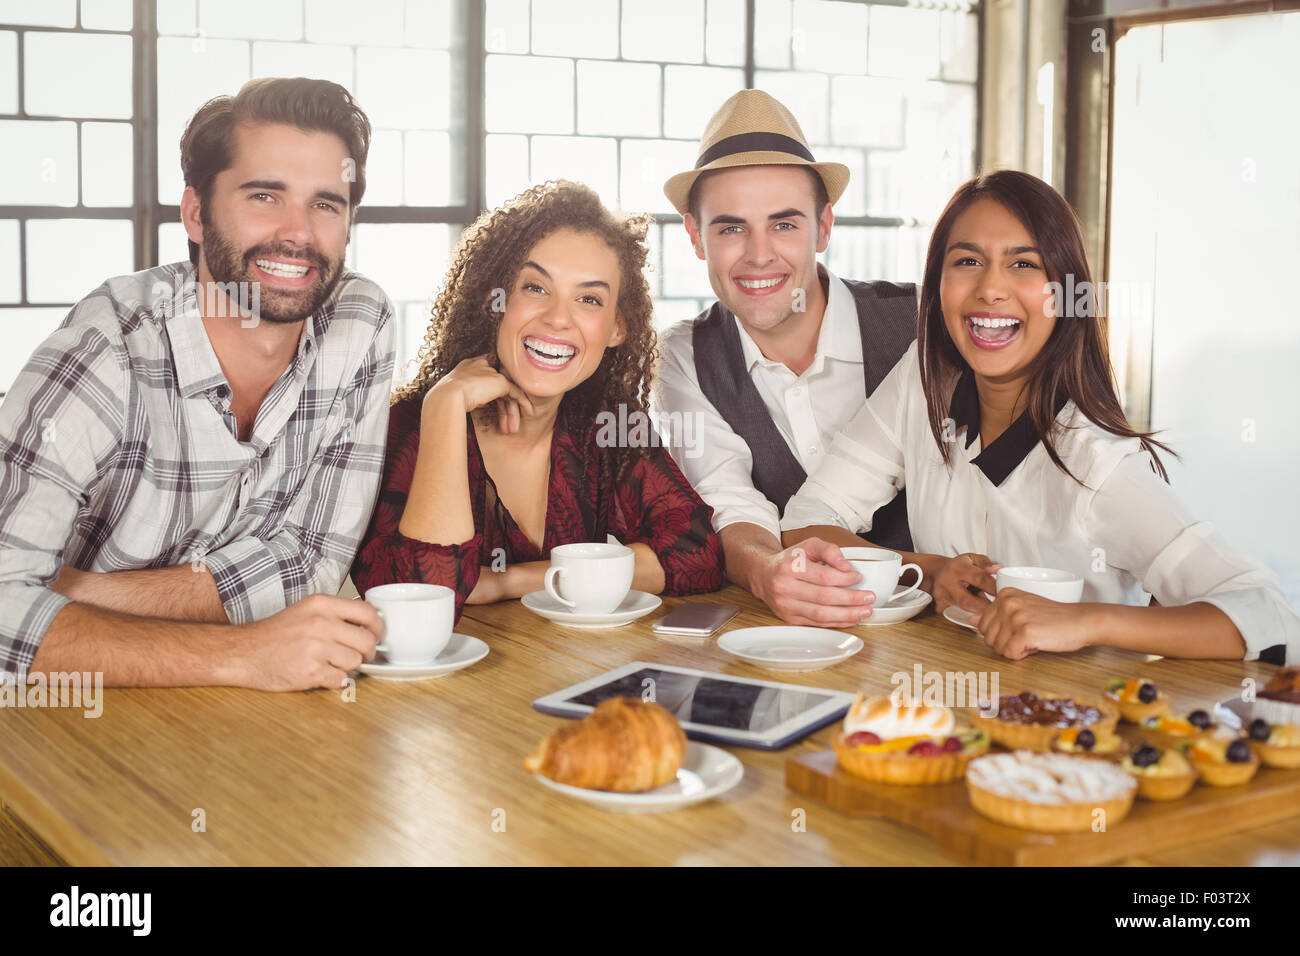 Laughing friends enjoying coffee and treats Stock Photo